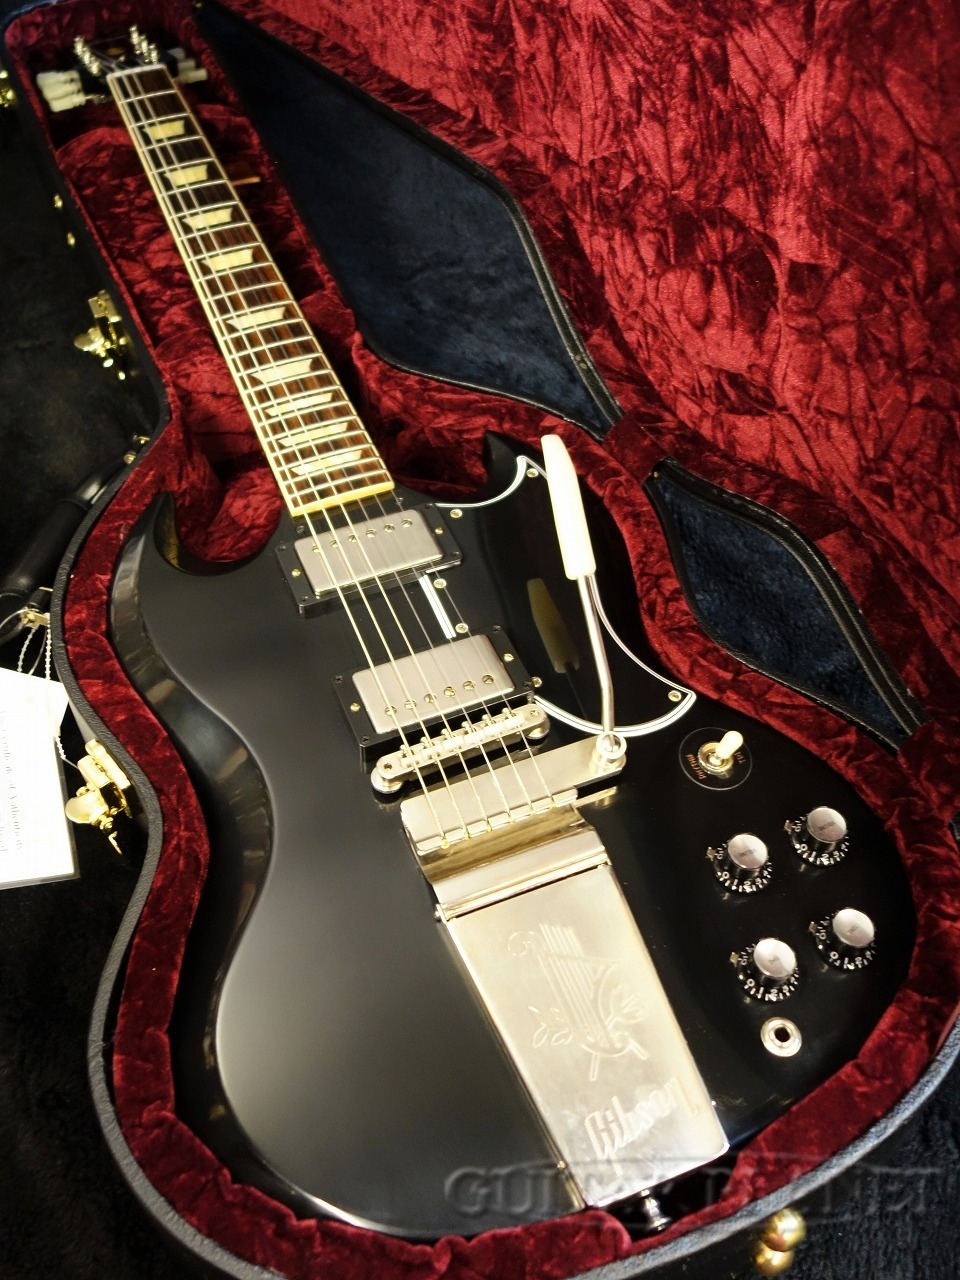 【Maestro by Gibson】SG Black マエストロ  ギブソン